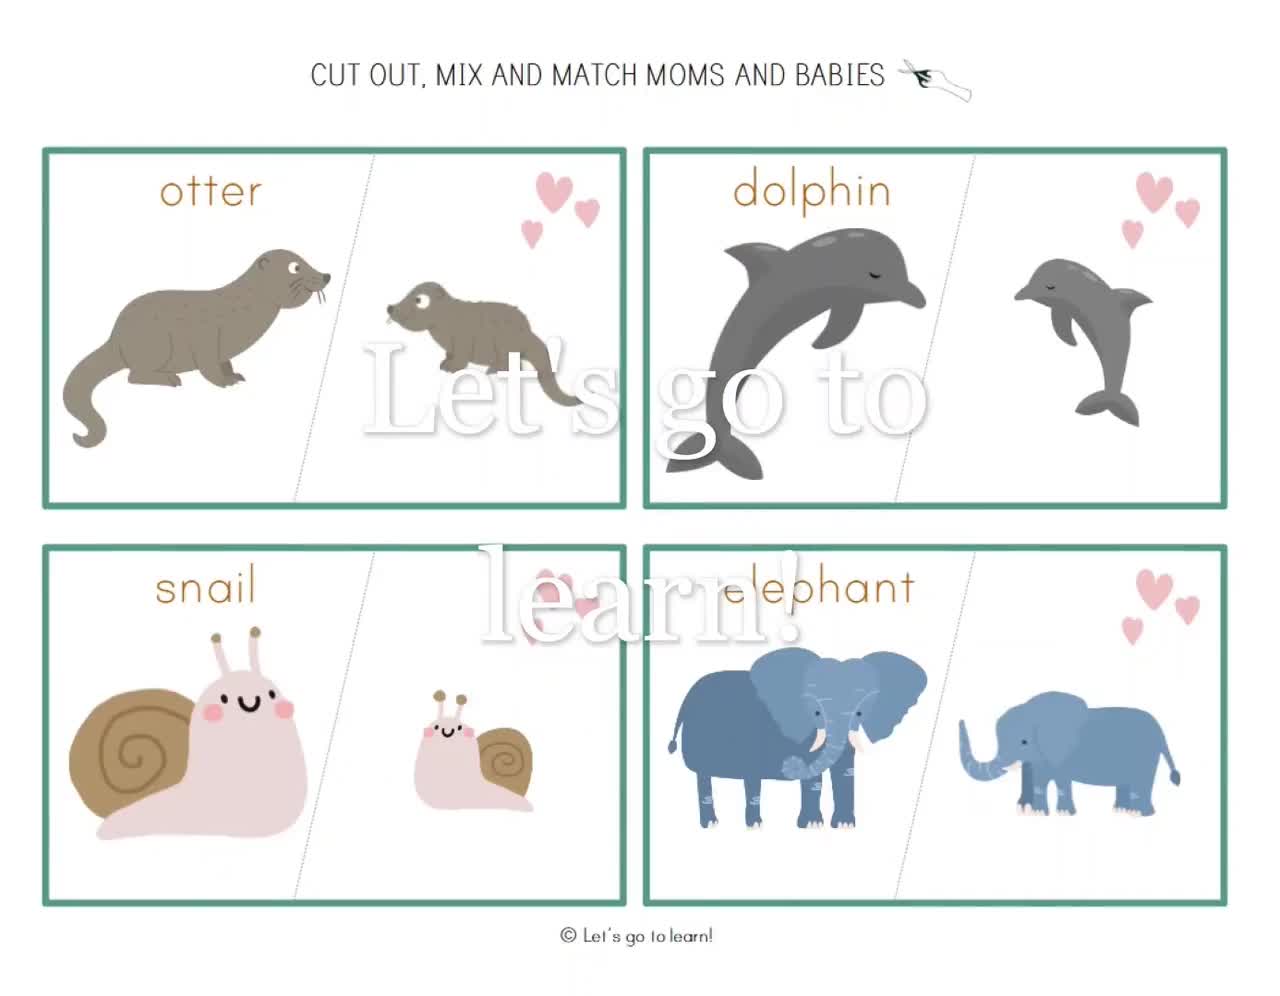 Mama & Baby Animal Matching Cards Montessori by Project Based Primary LLC